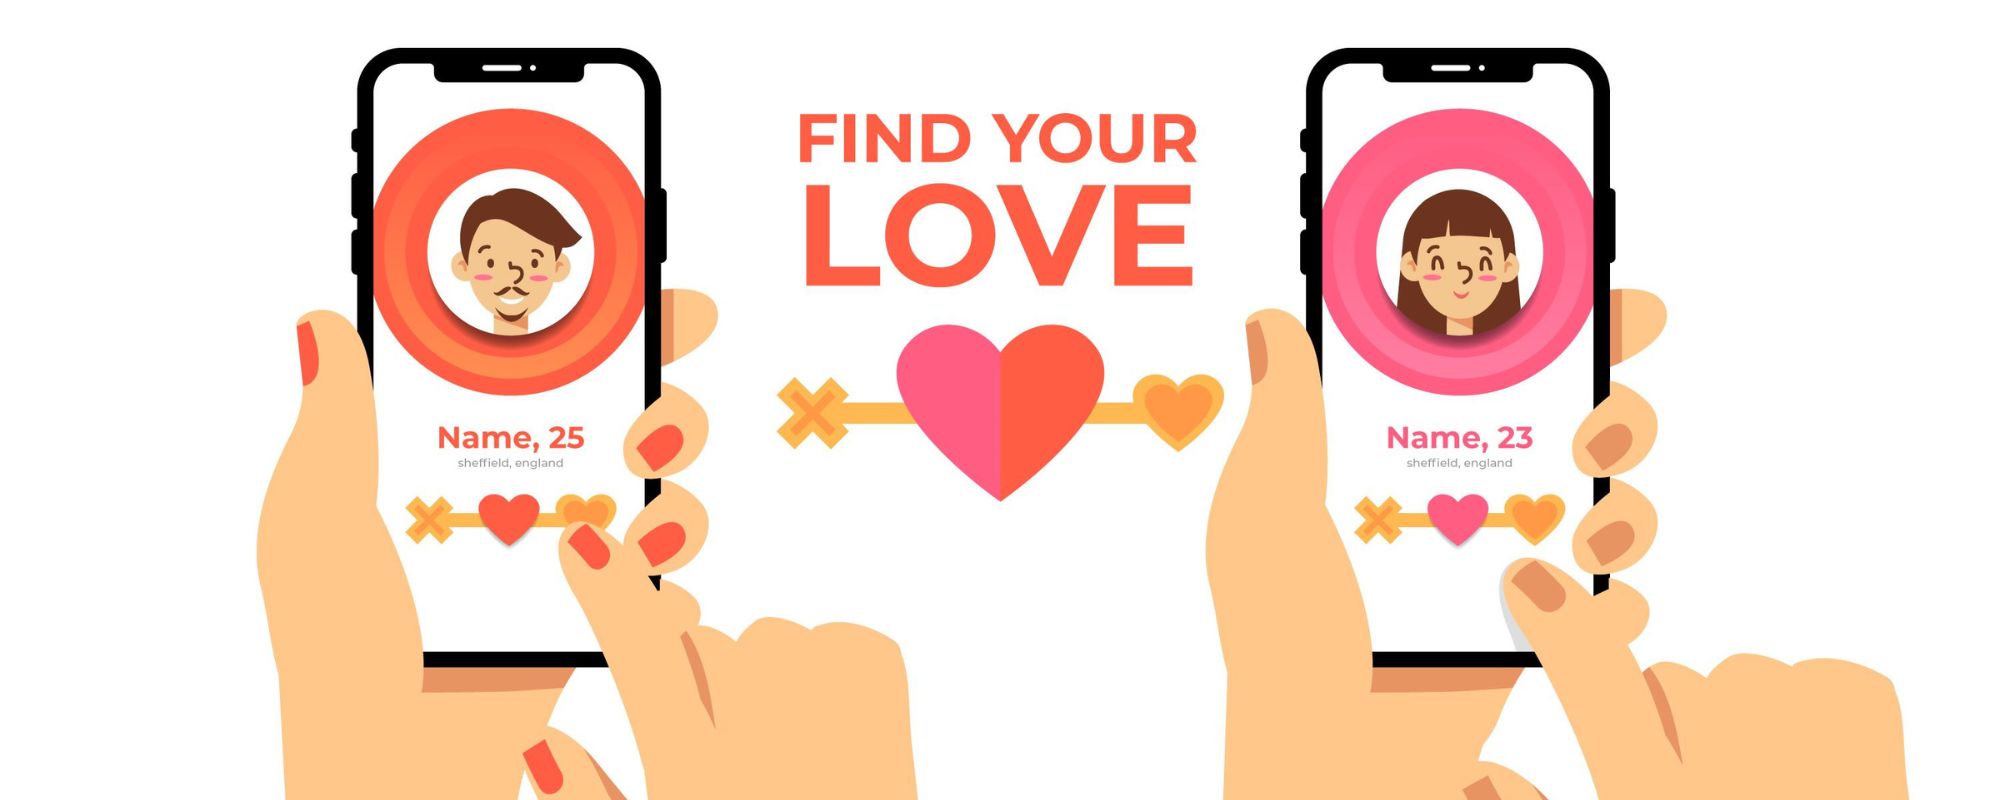 business model of dating apps in chicago